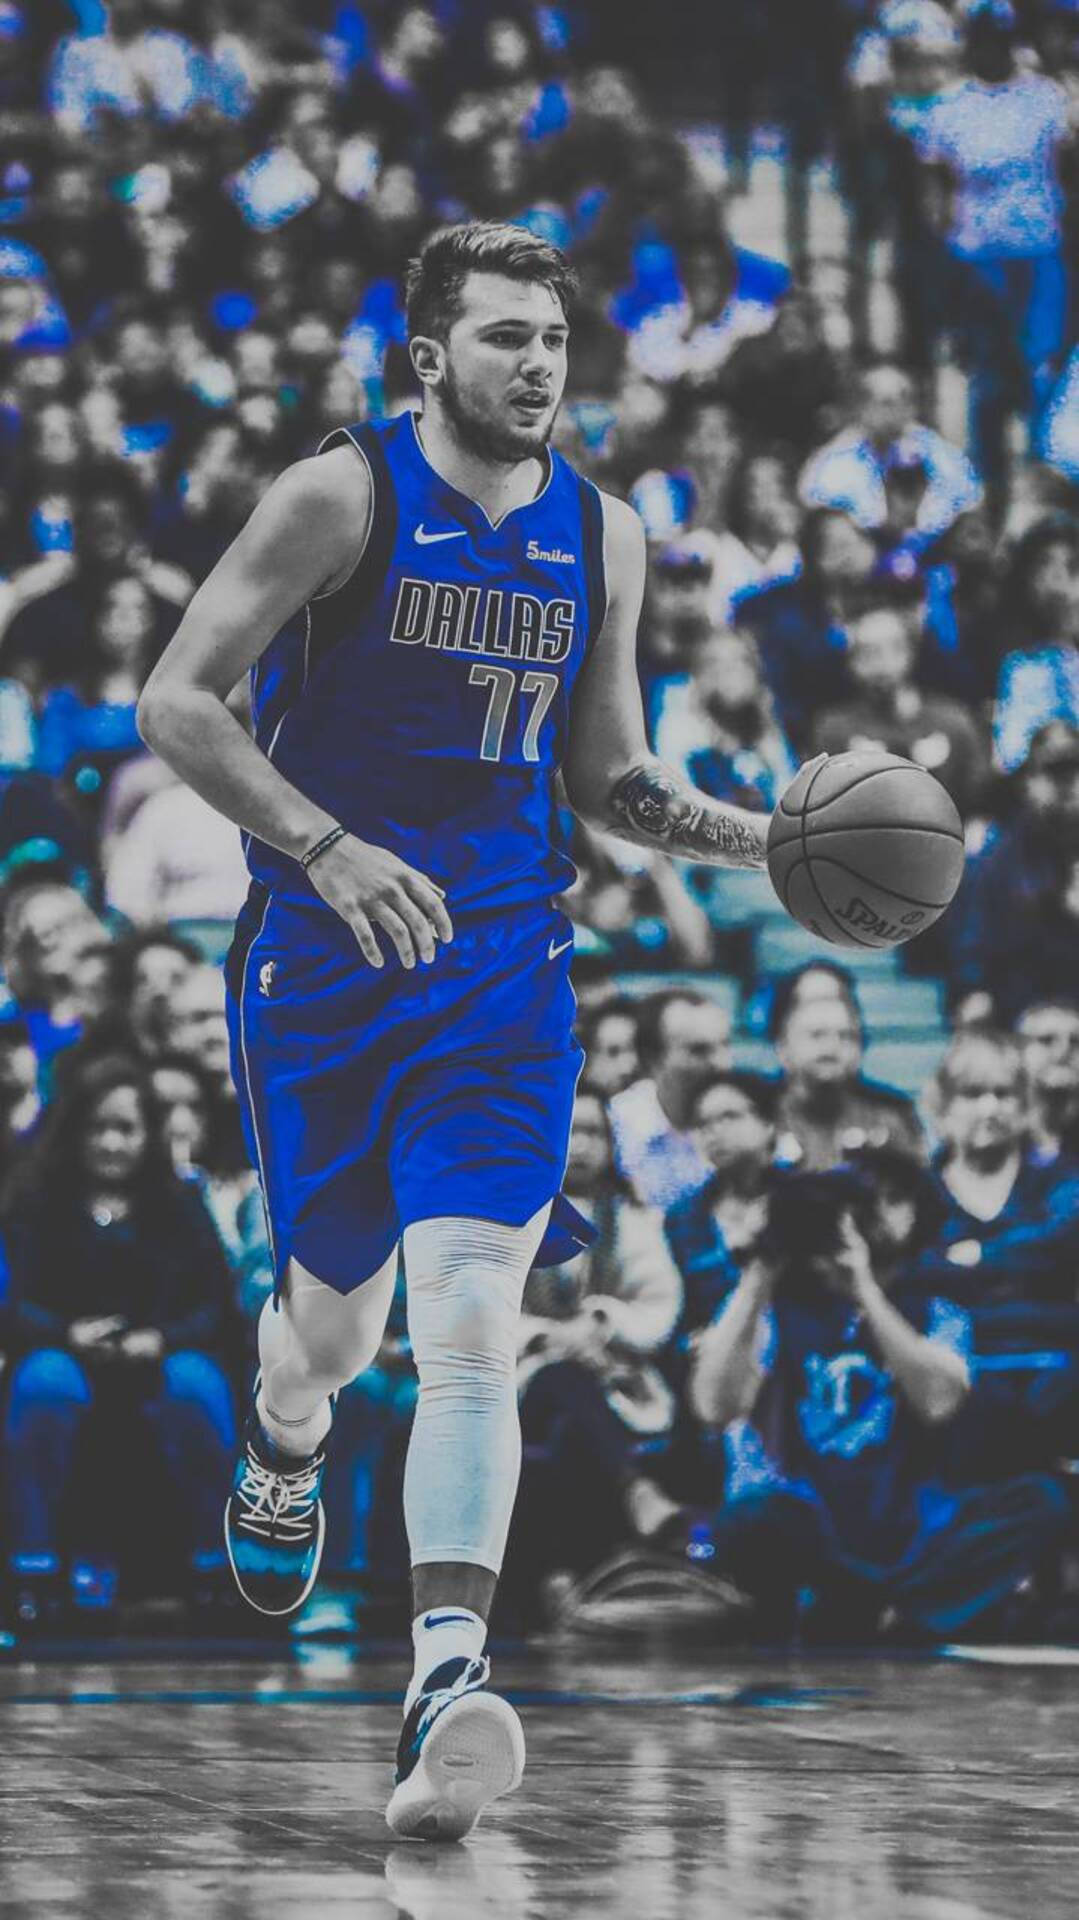 Dribbling Luka Doncic Background